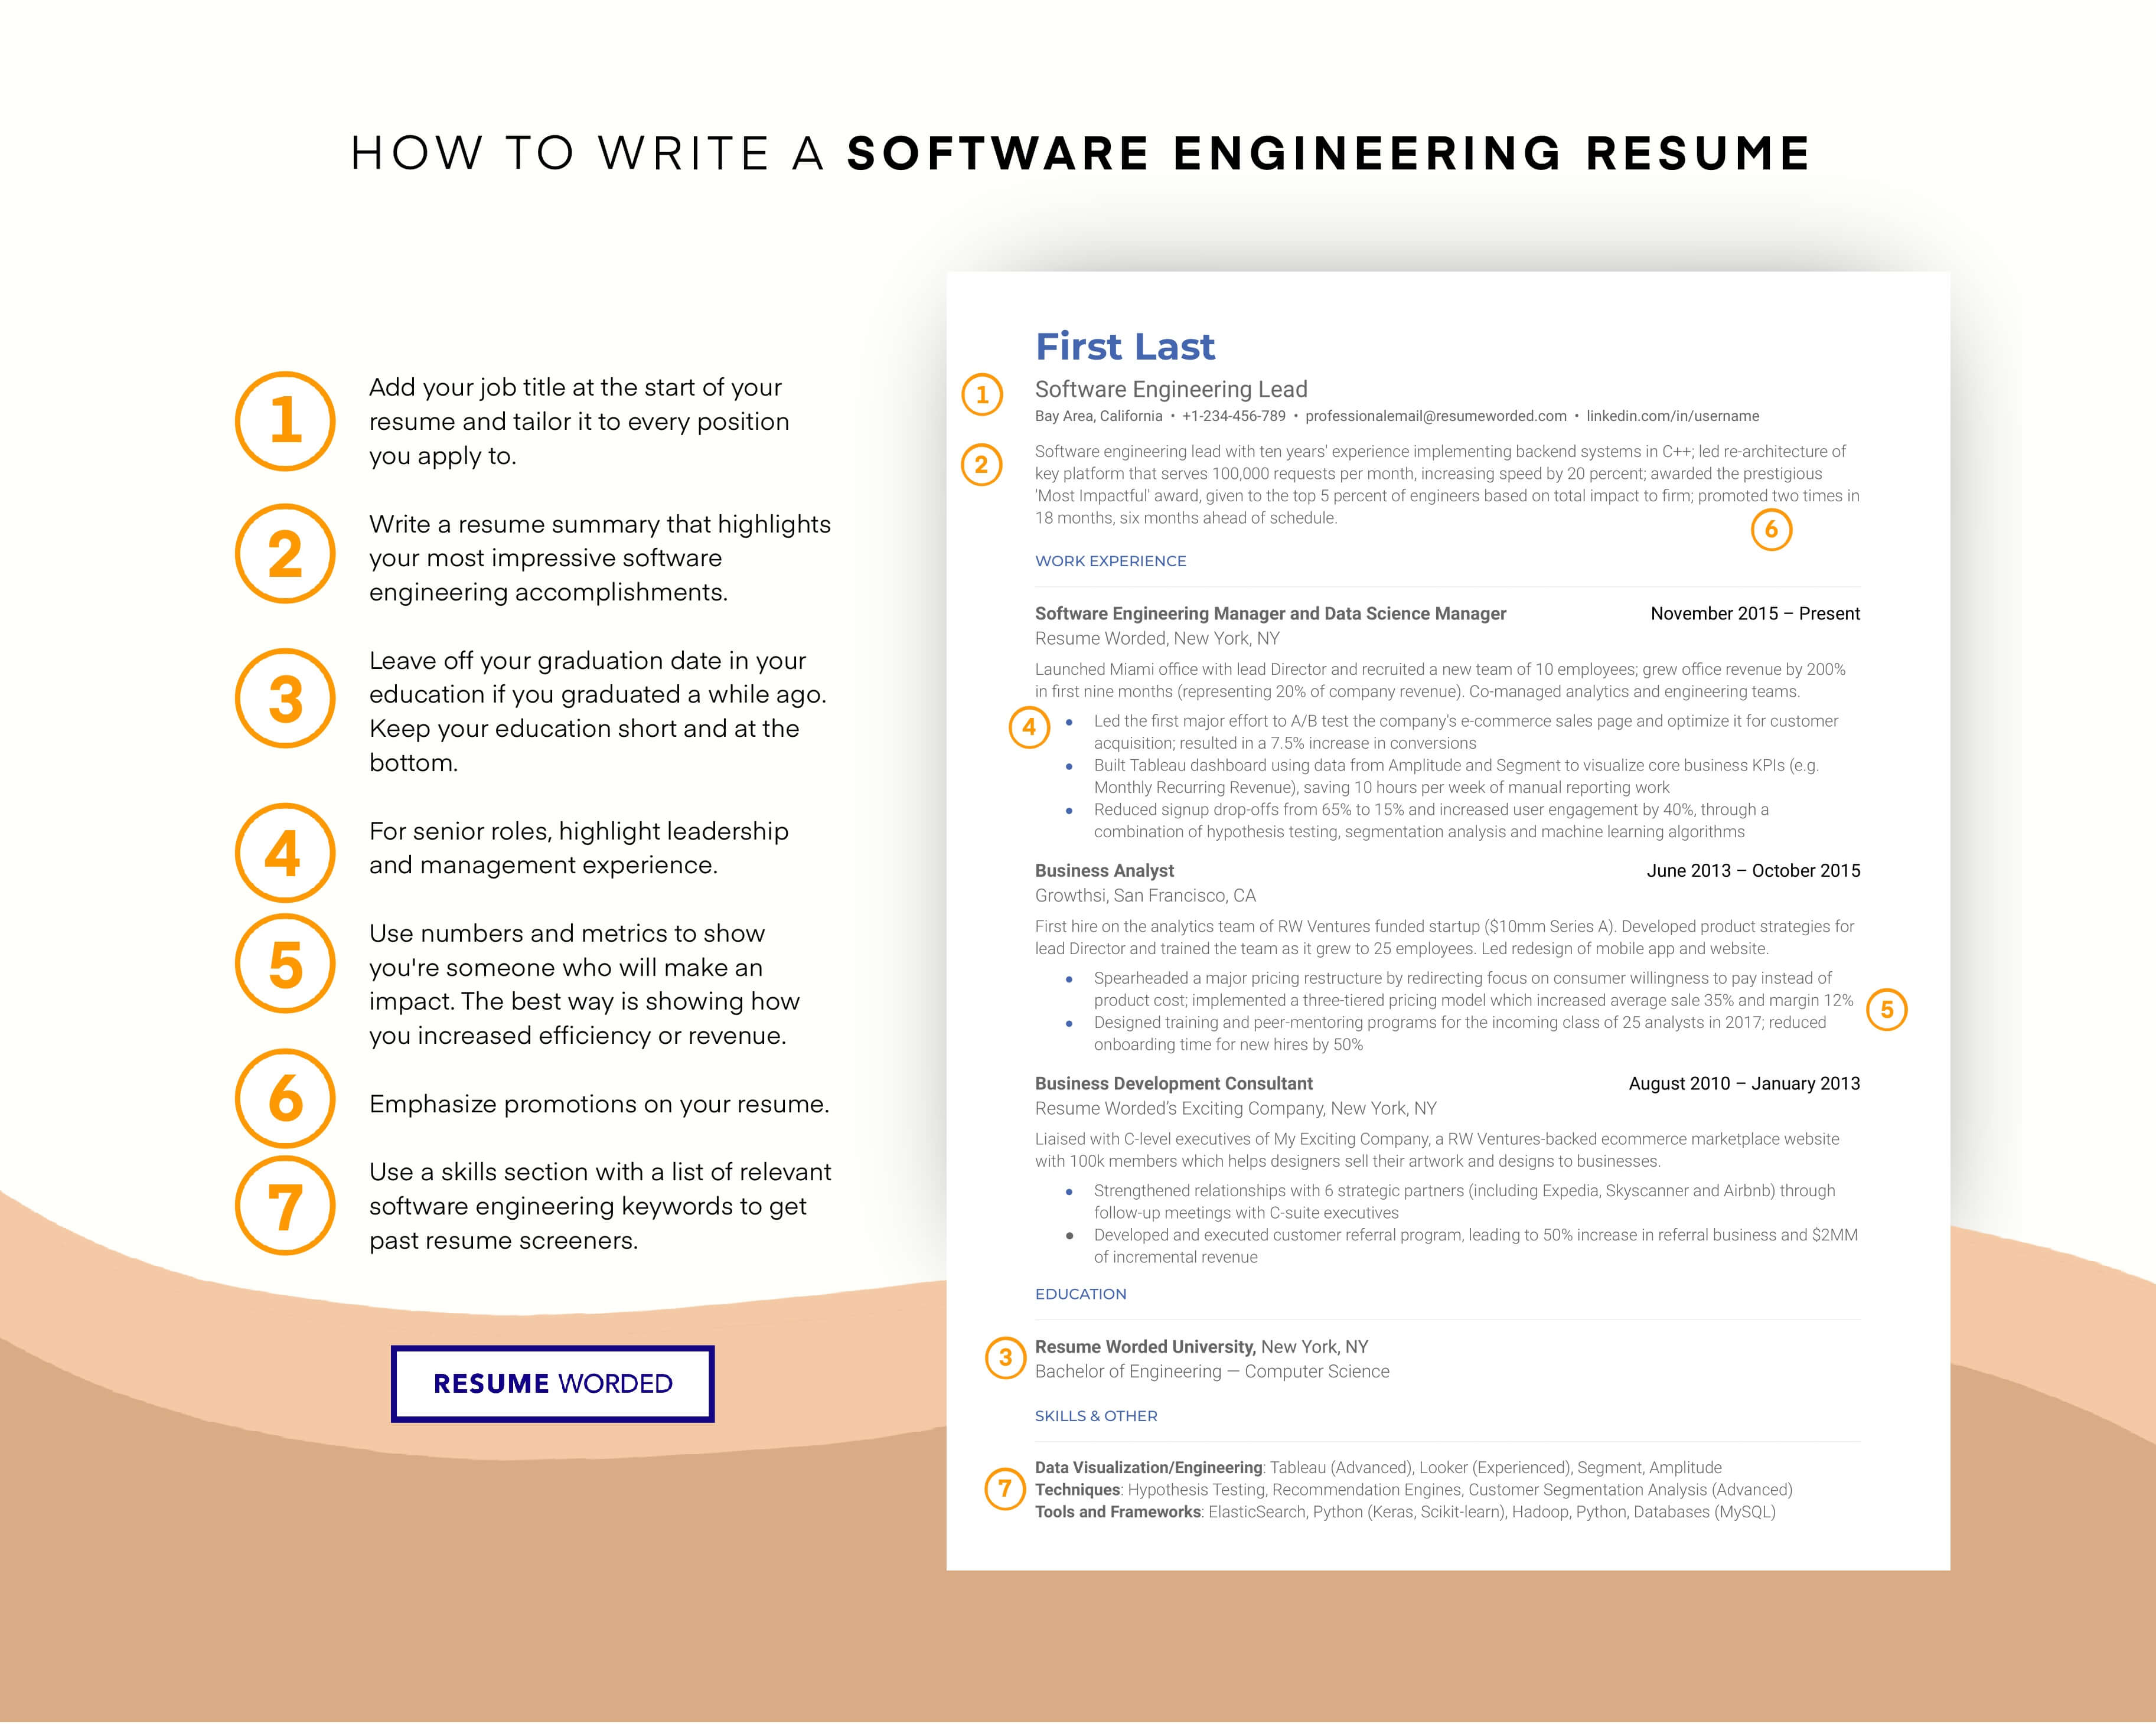 Include relevant certifications in software development. - Software Project Lead Resume